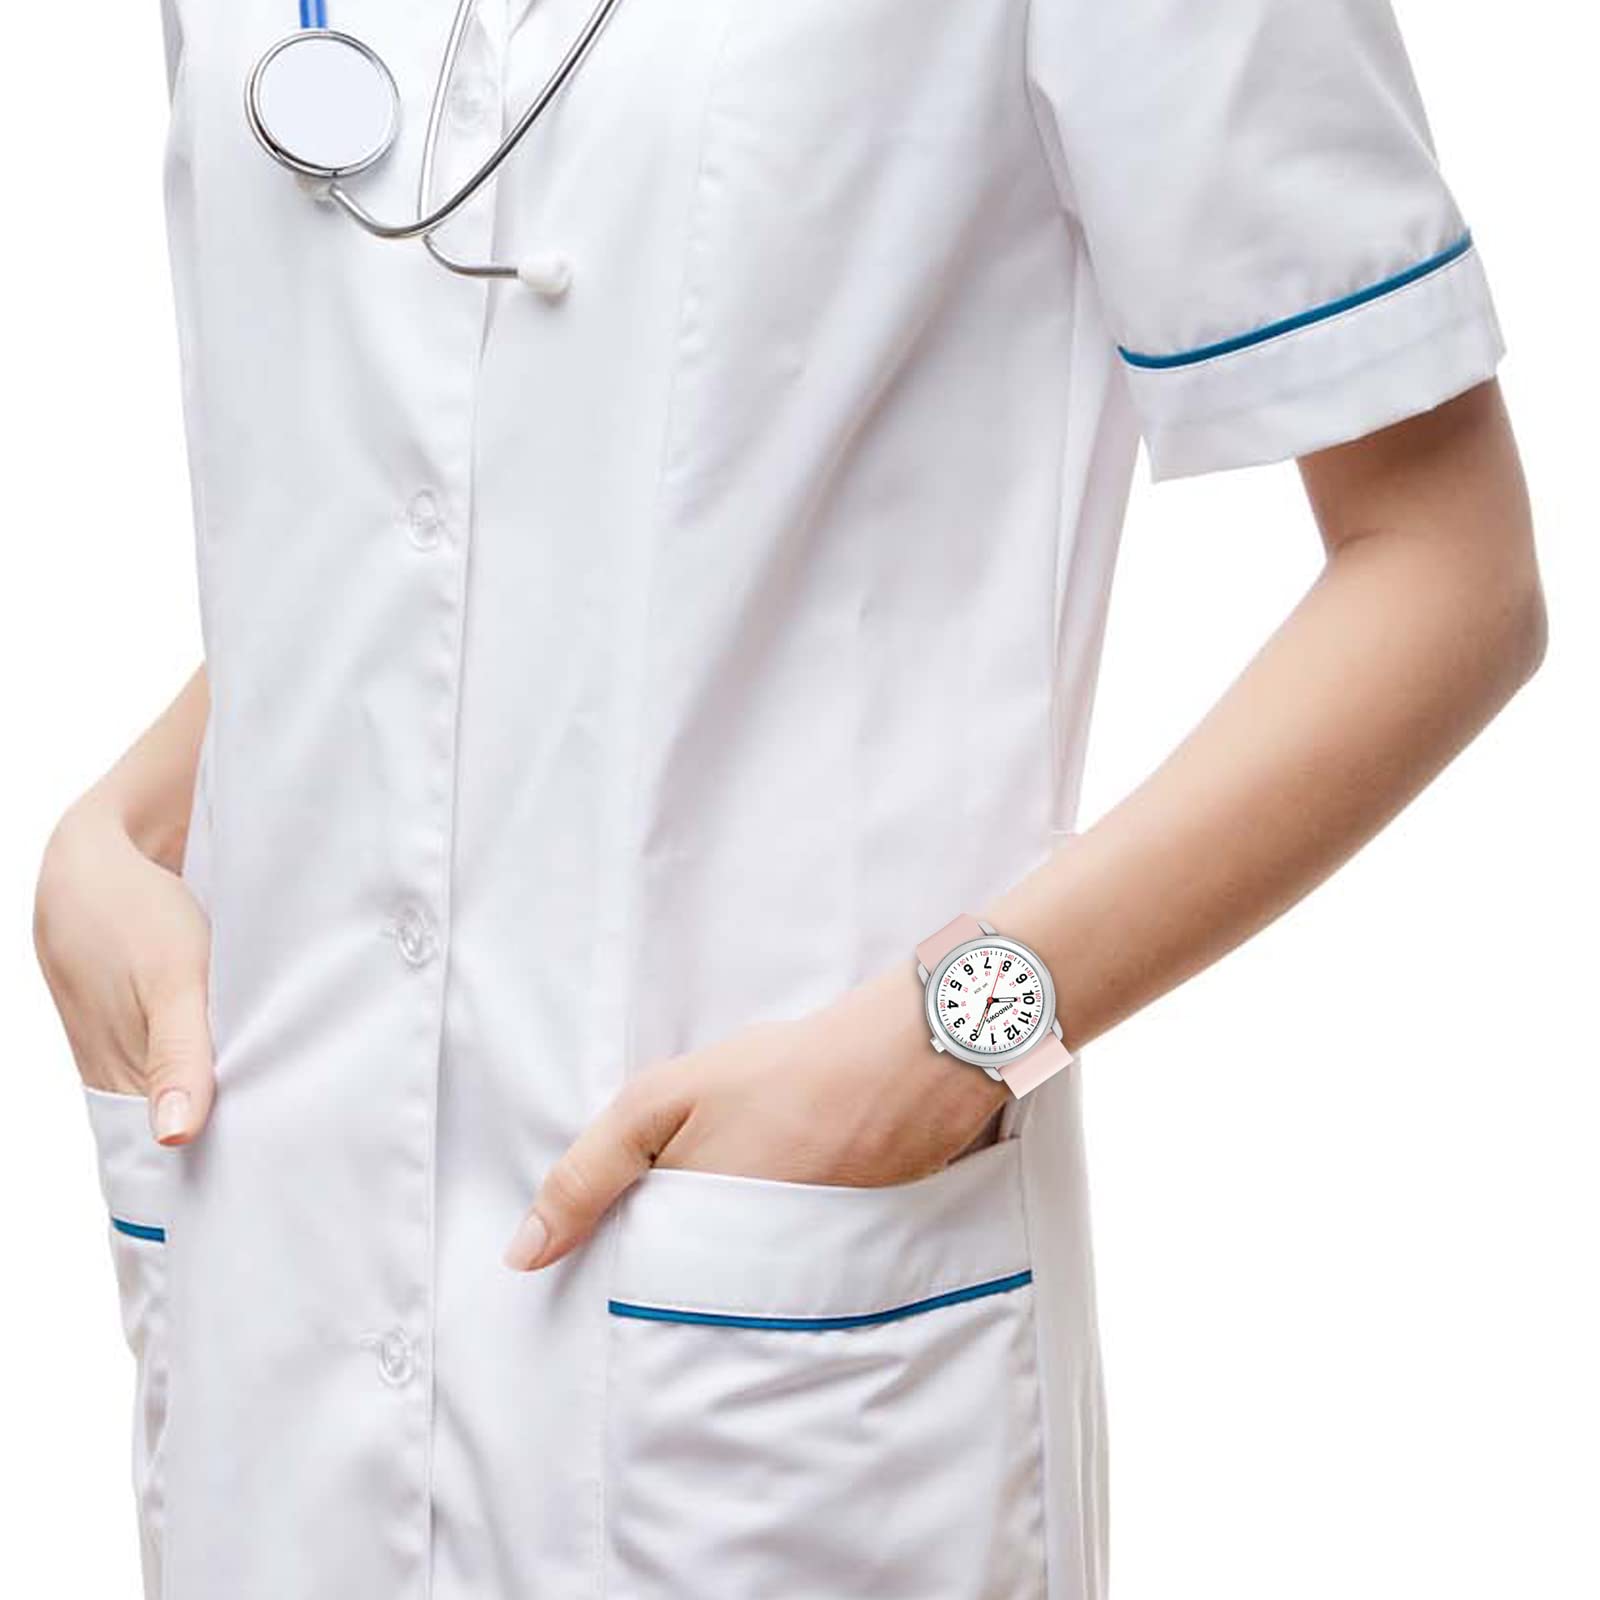 PINDOWS Nurse Watch for Nurses, Doctors, Medical Professionals, Students, Easy to Read Waterproof Women's Men Medical Watch Luminous Dial 12/24 Hour Display, Soft Breathable Silicone Band Replaceable.